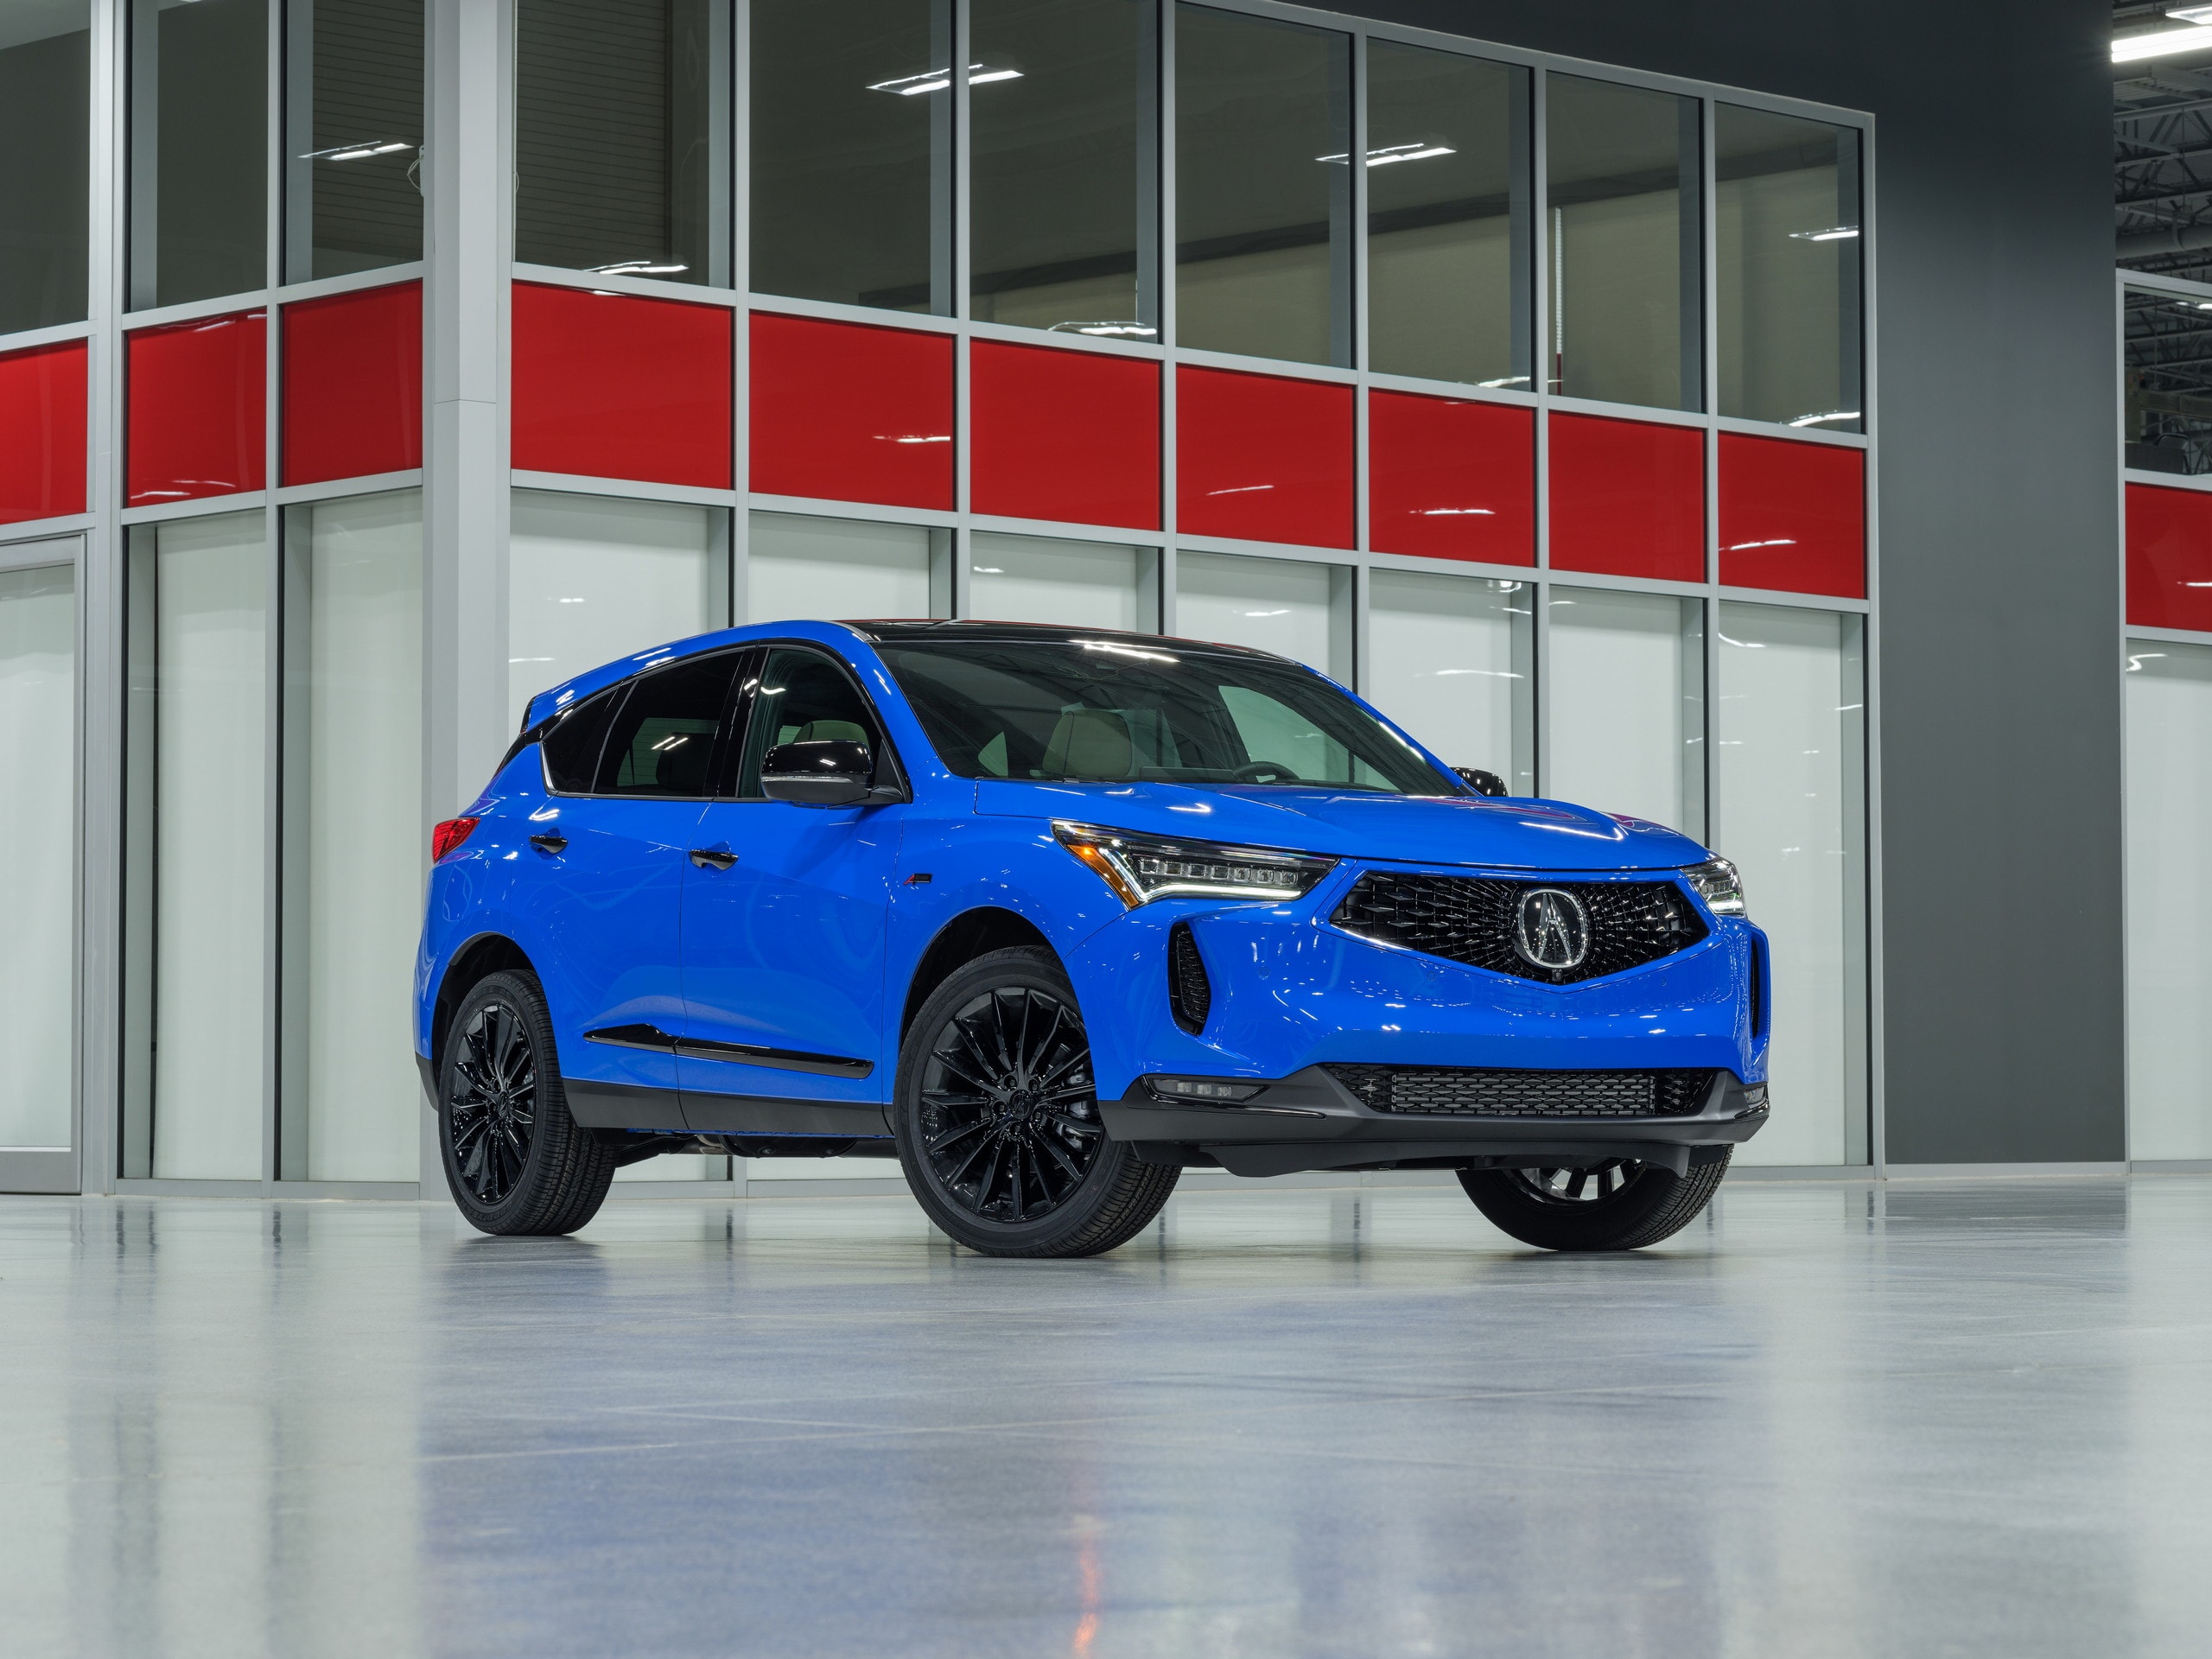 https://s1.cdn.autoevolution.com/images/news/2022-acura-rdx-goes-under-the-knife-gets-new-face-and-more-tech-features-169928_1.jpg